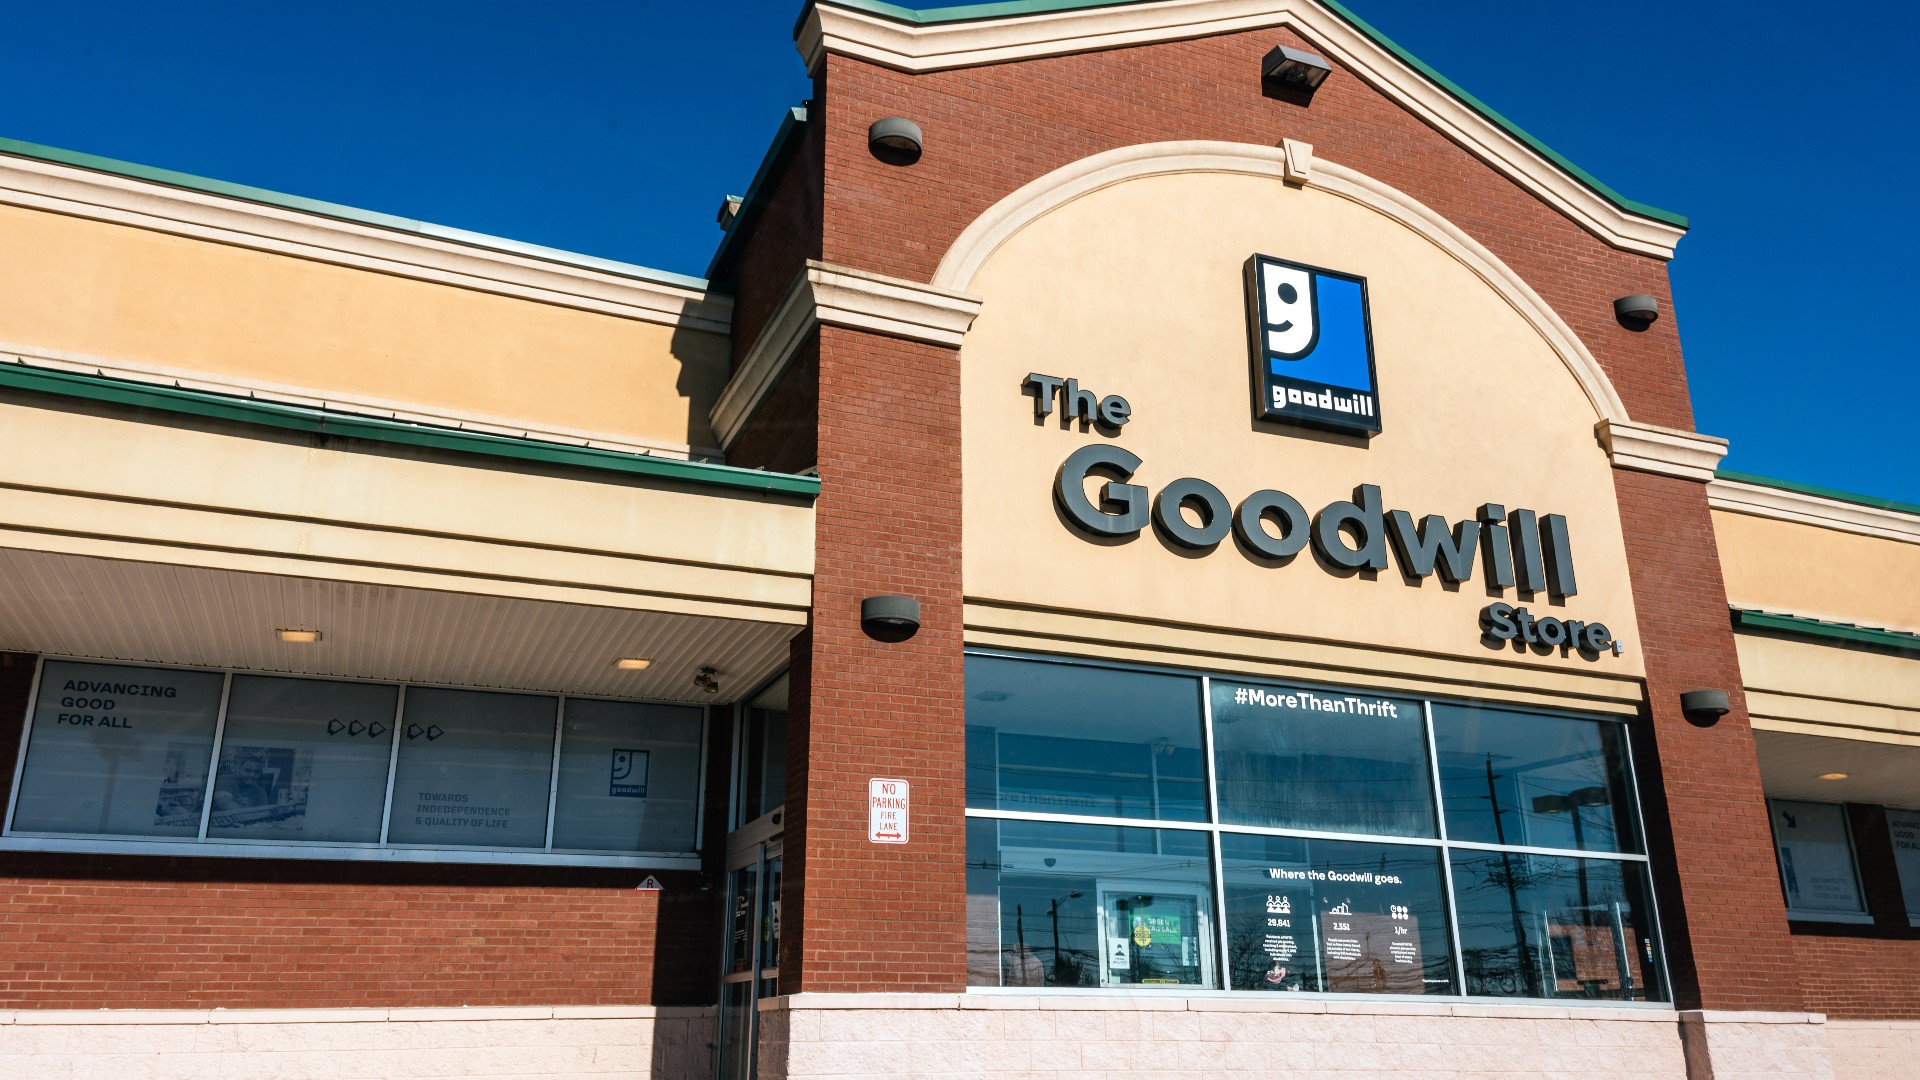 The program provides transportation for people to get to work -- helping them earn a paycheck, have lunch, and stay connected with Goodwill's resources.